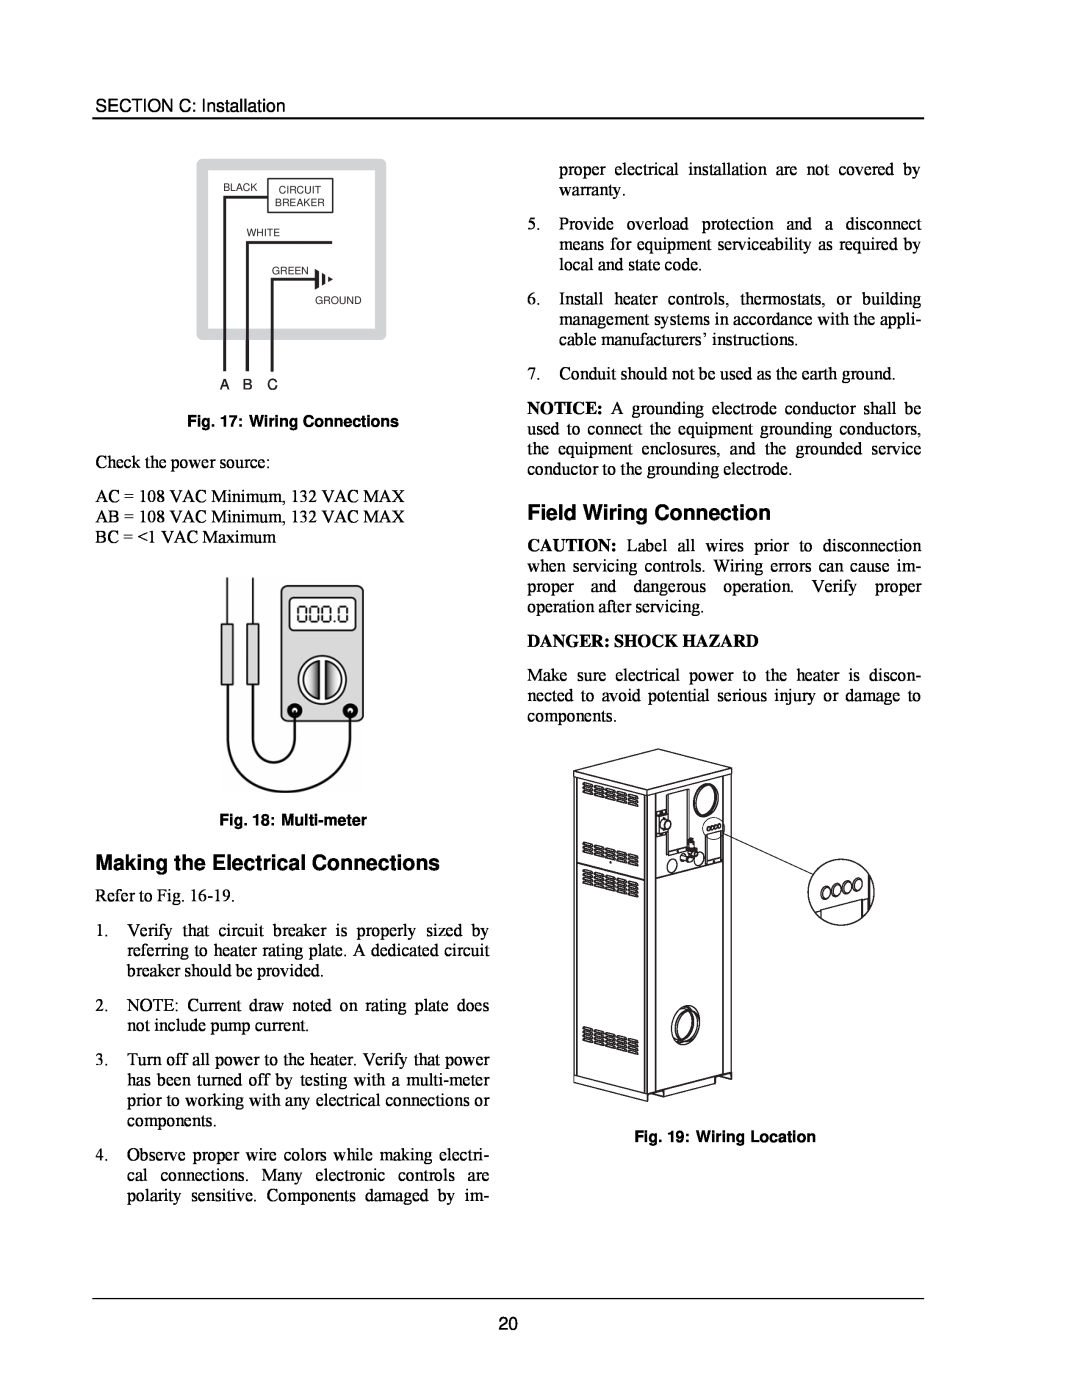 Raypak 503-2003 manual Making the Electrical Connections, Field Wiring Connection, Danger Shock Hazard 